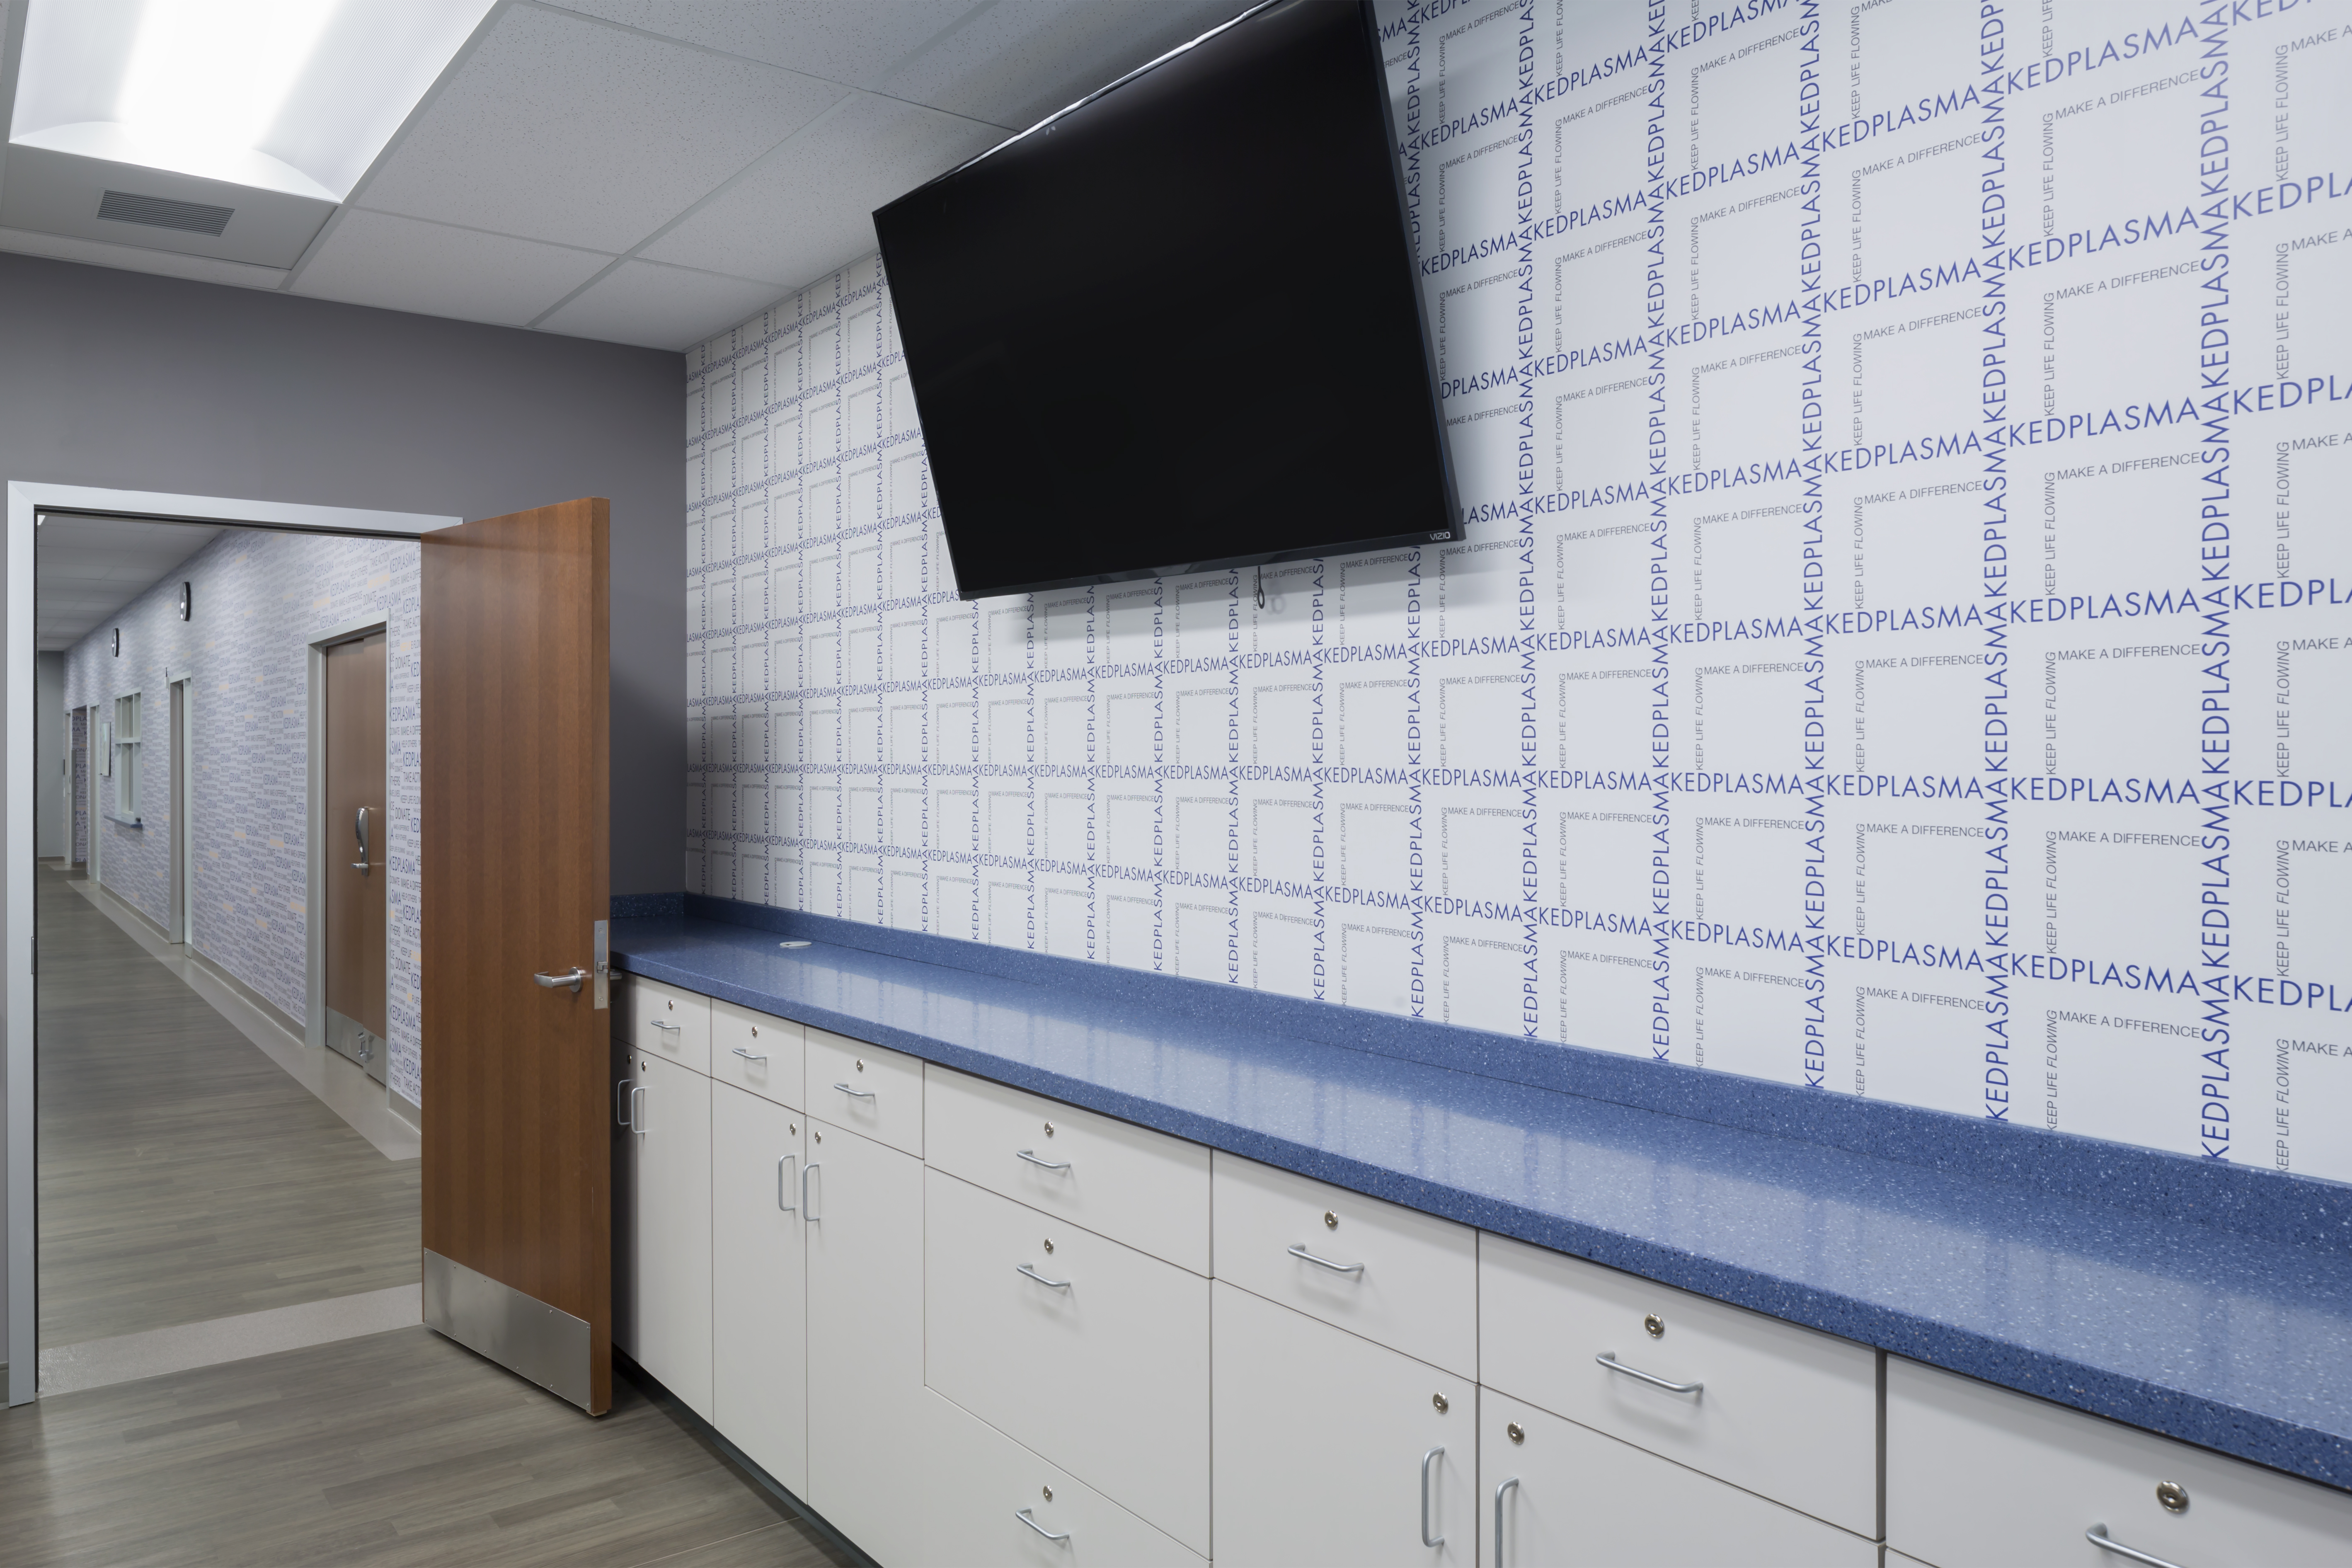 Choosing The Right Wall Finish For Your Plasma Center